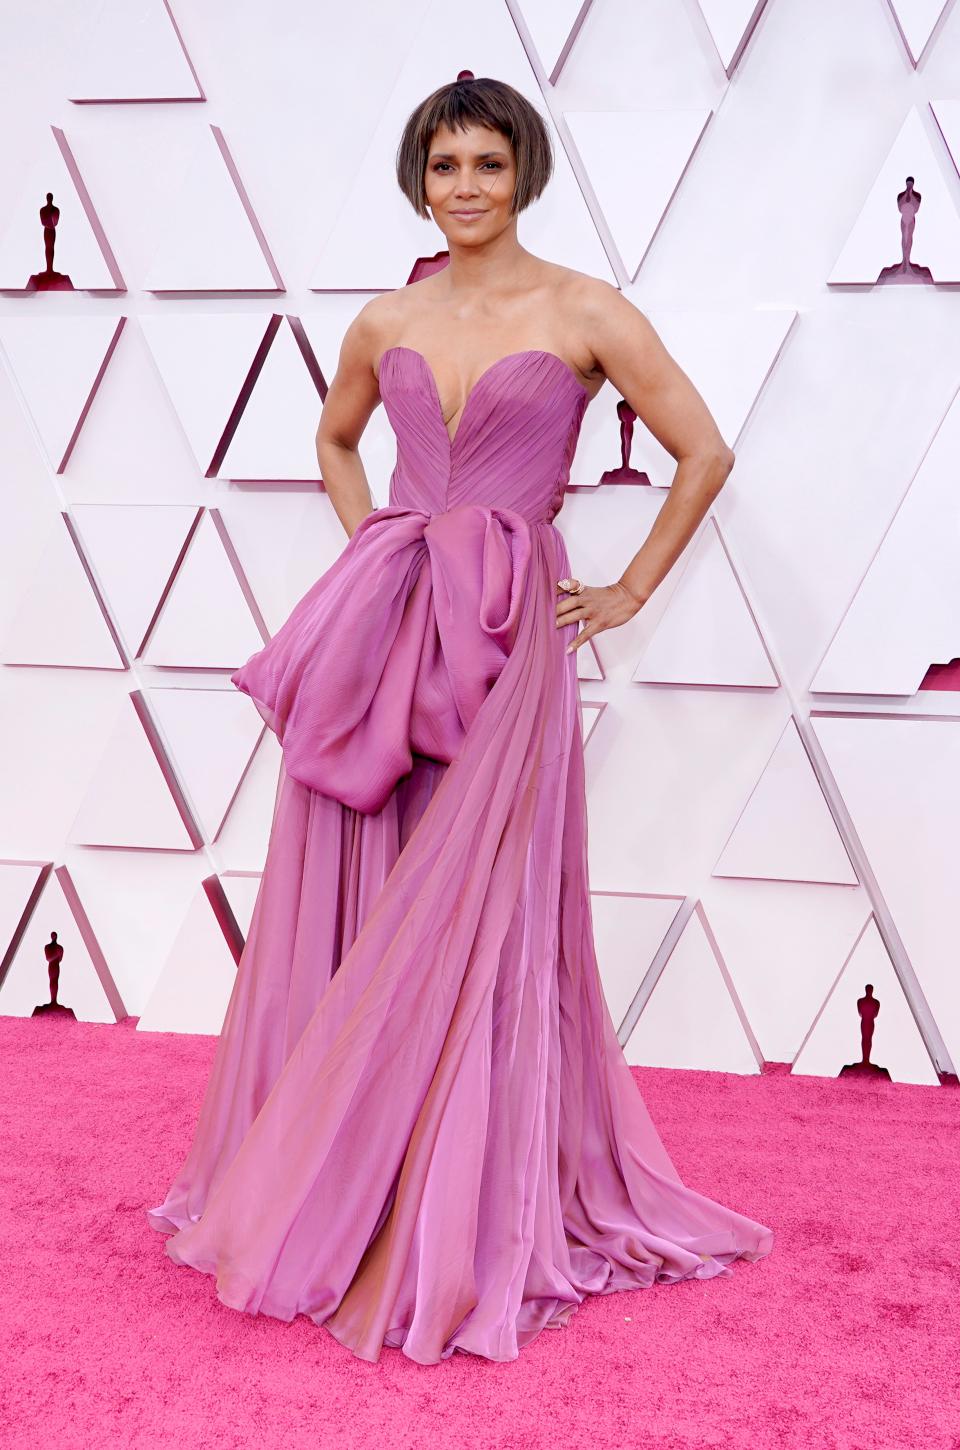 Halle Berry on the Oscars red carpet wearing Dolce & GabbanaGetty